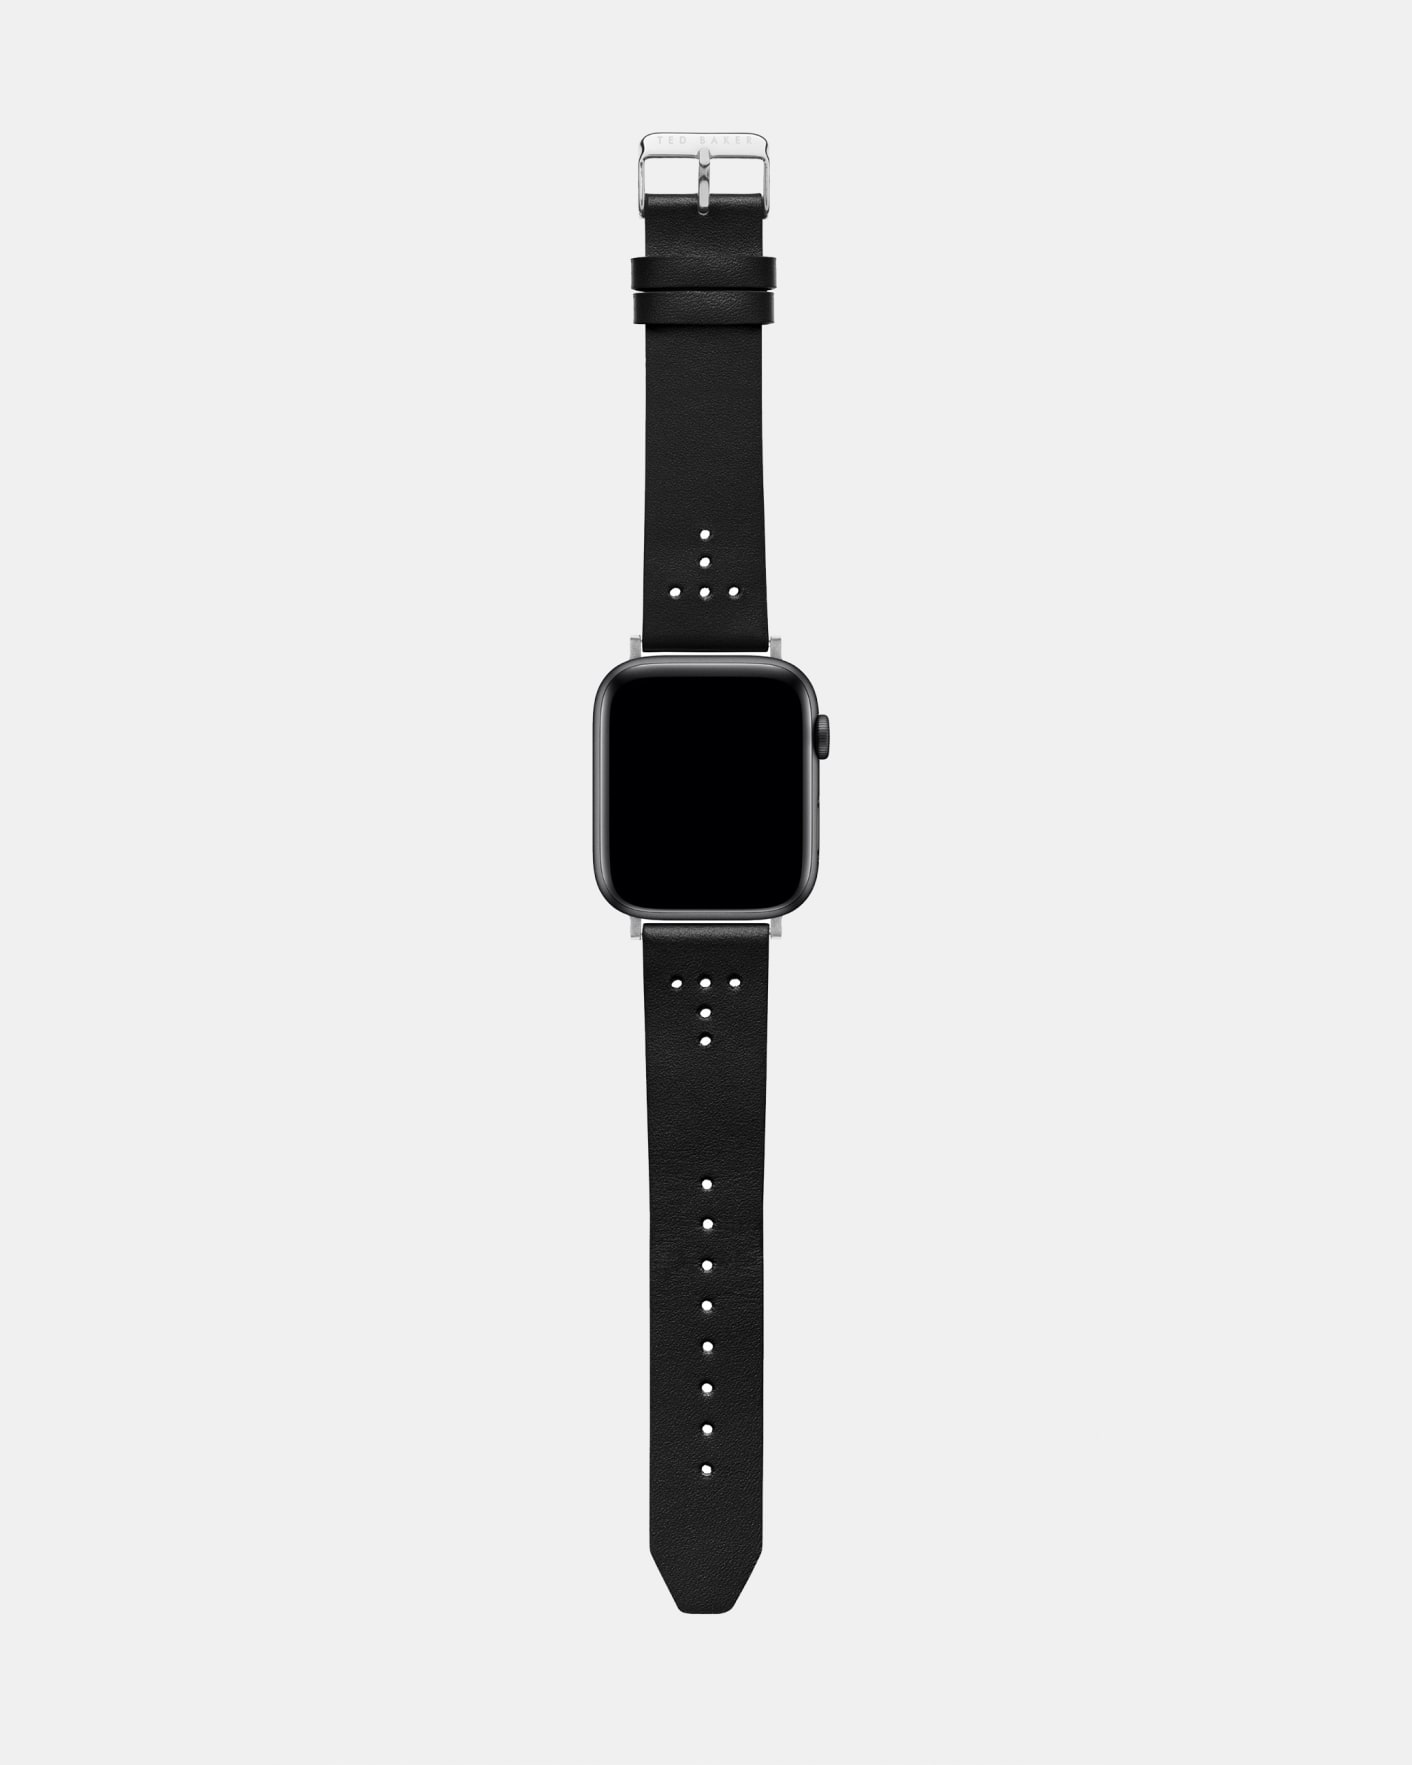 Black T Leather Apple Watch Strap Ted Baker